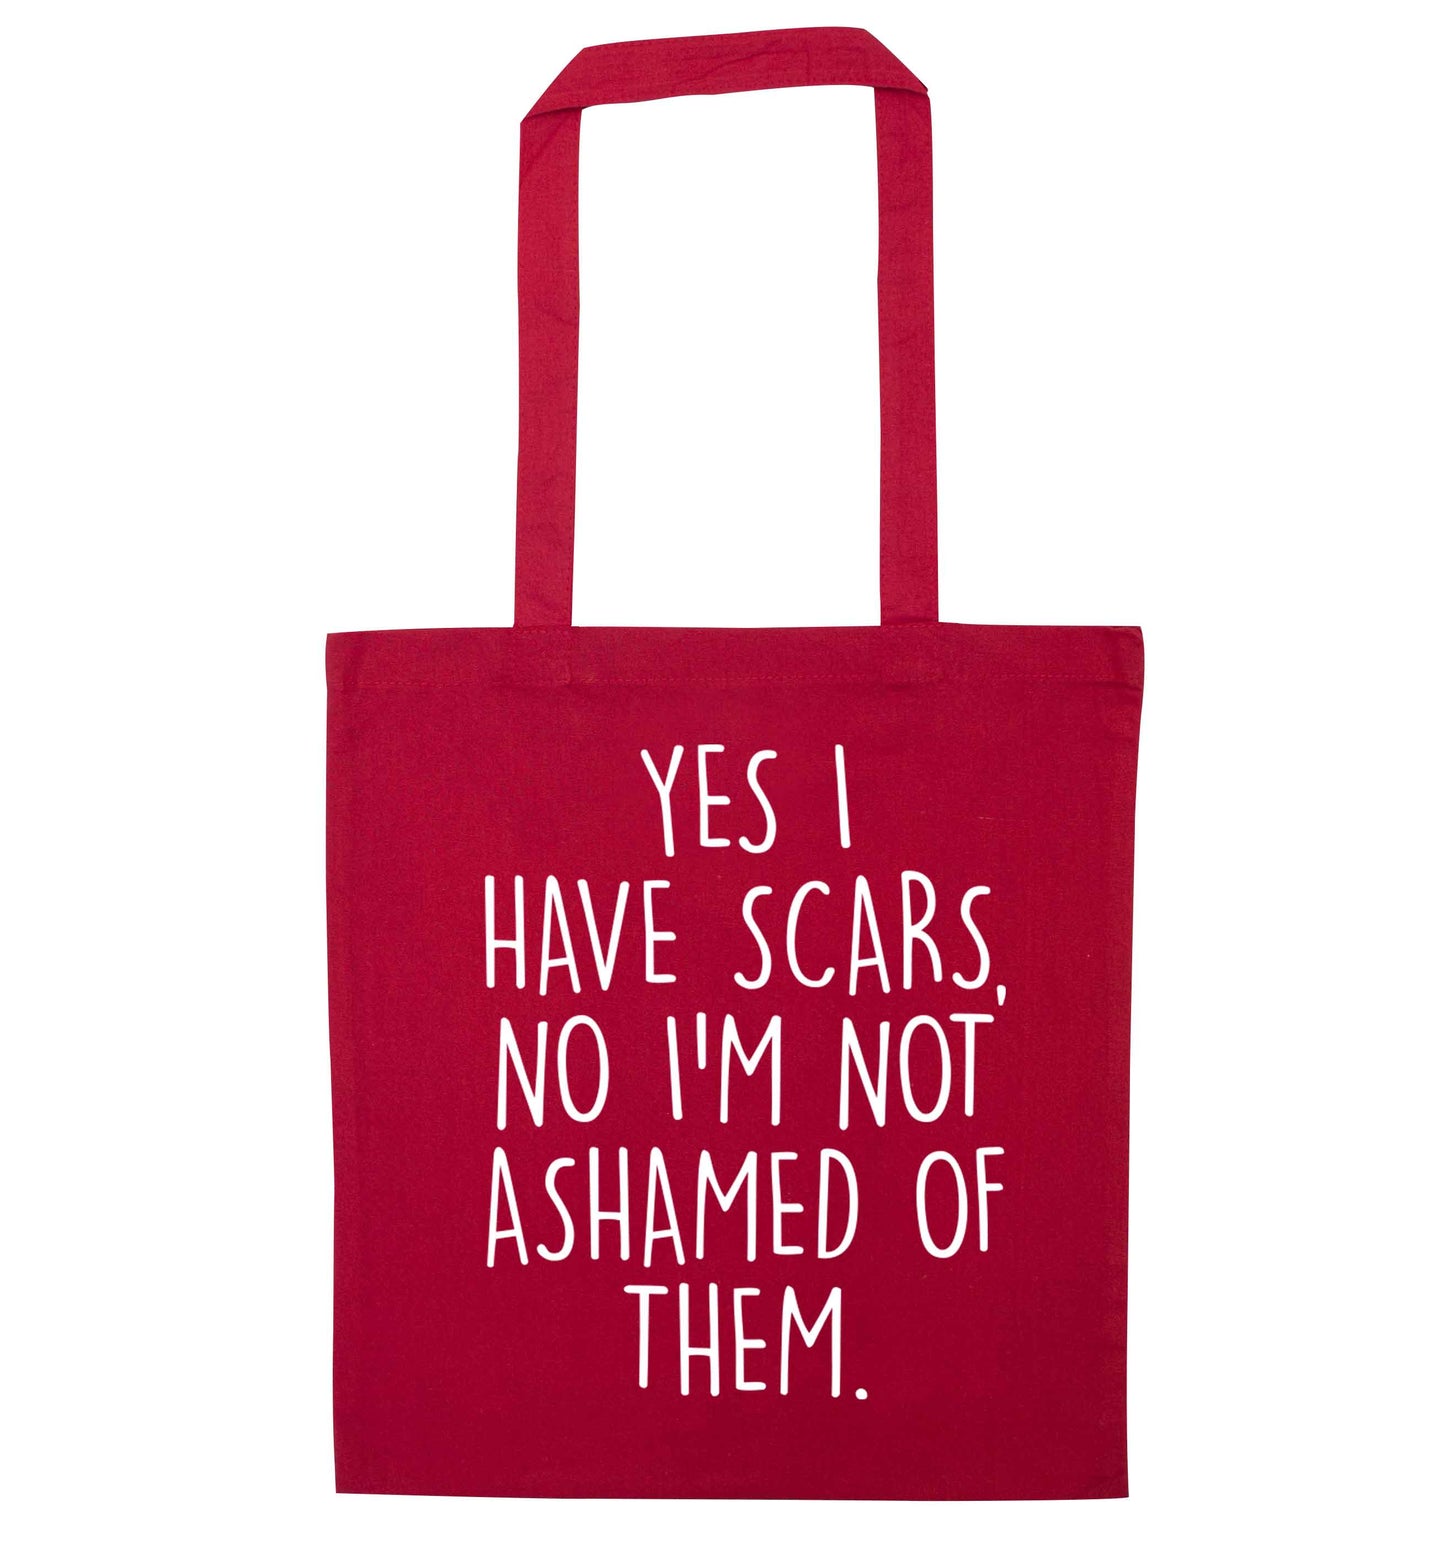 Yes I have scars, no I'm not ashamed of them red tote bag